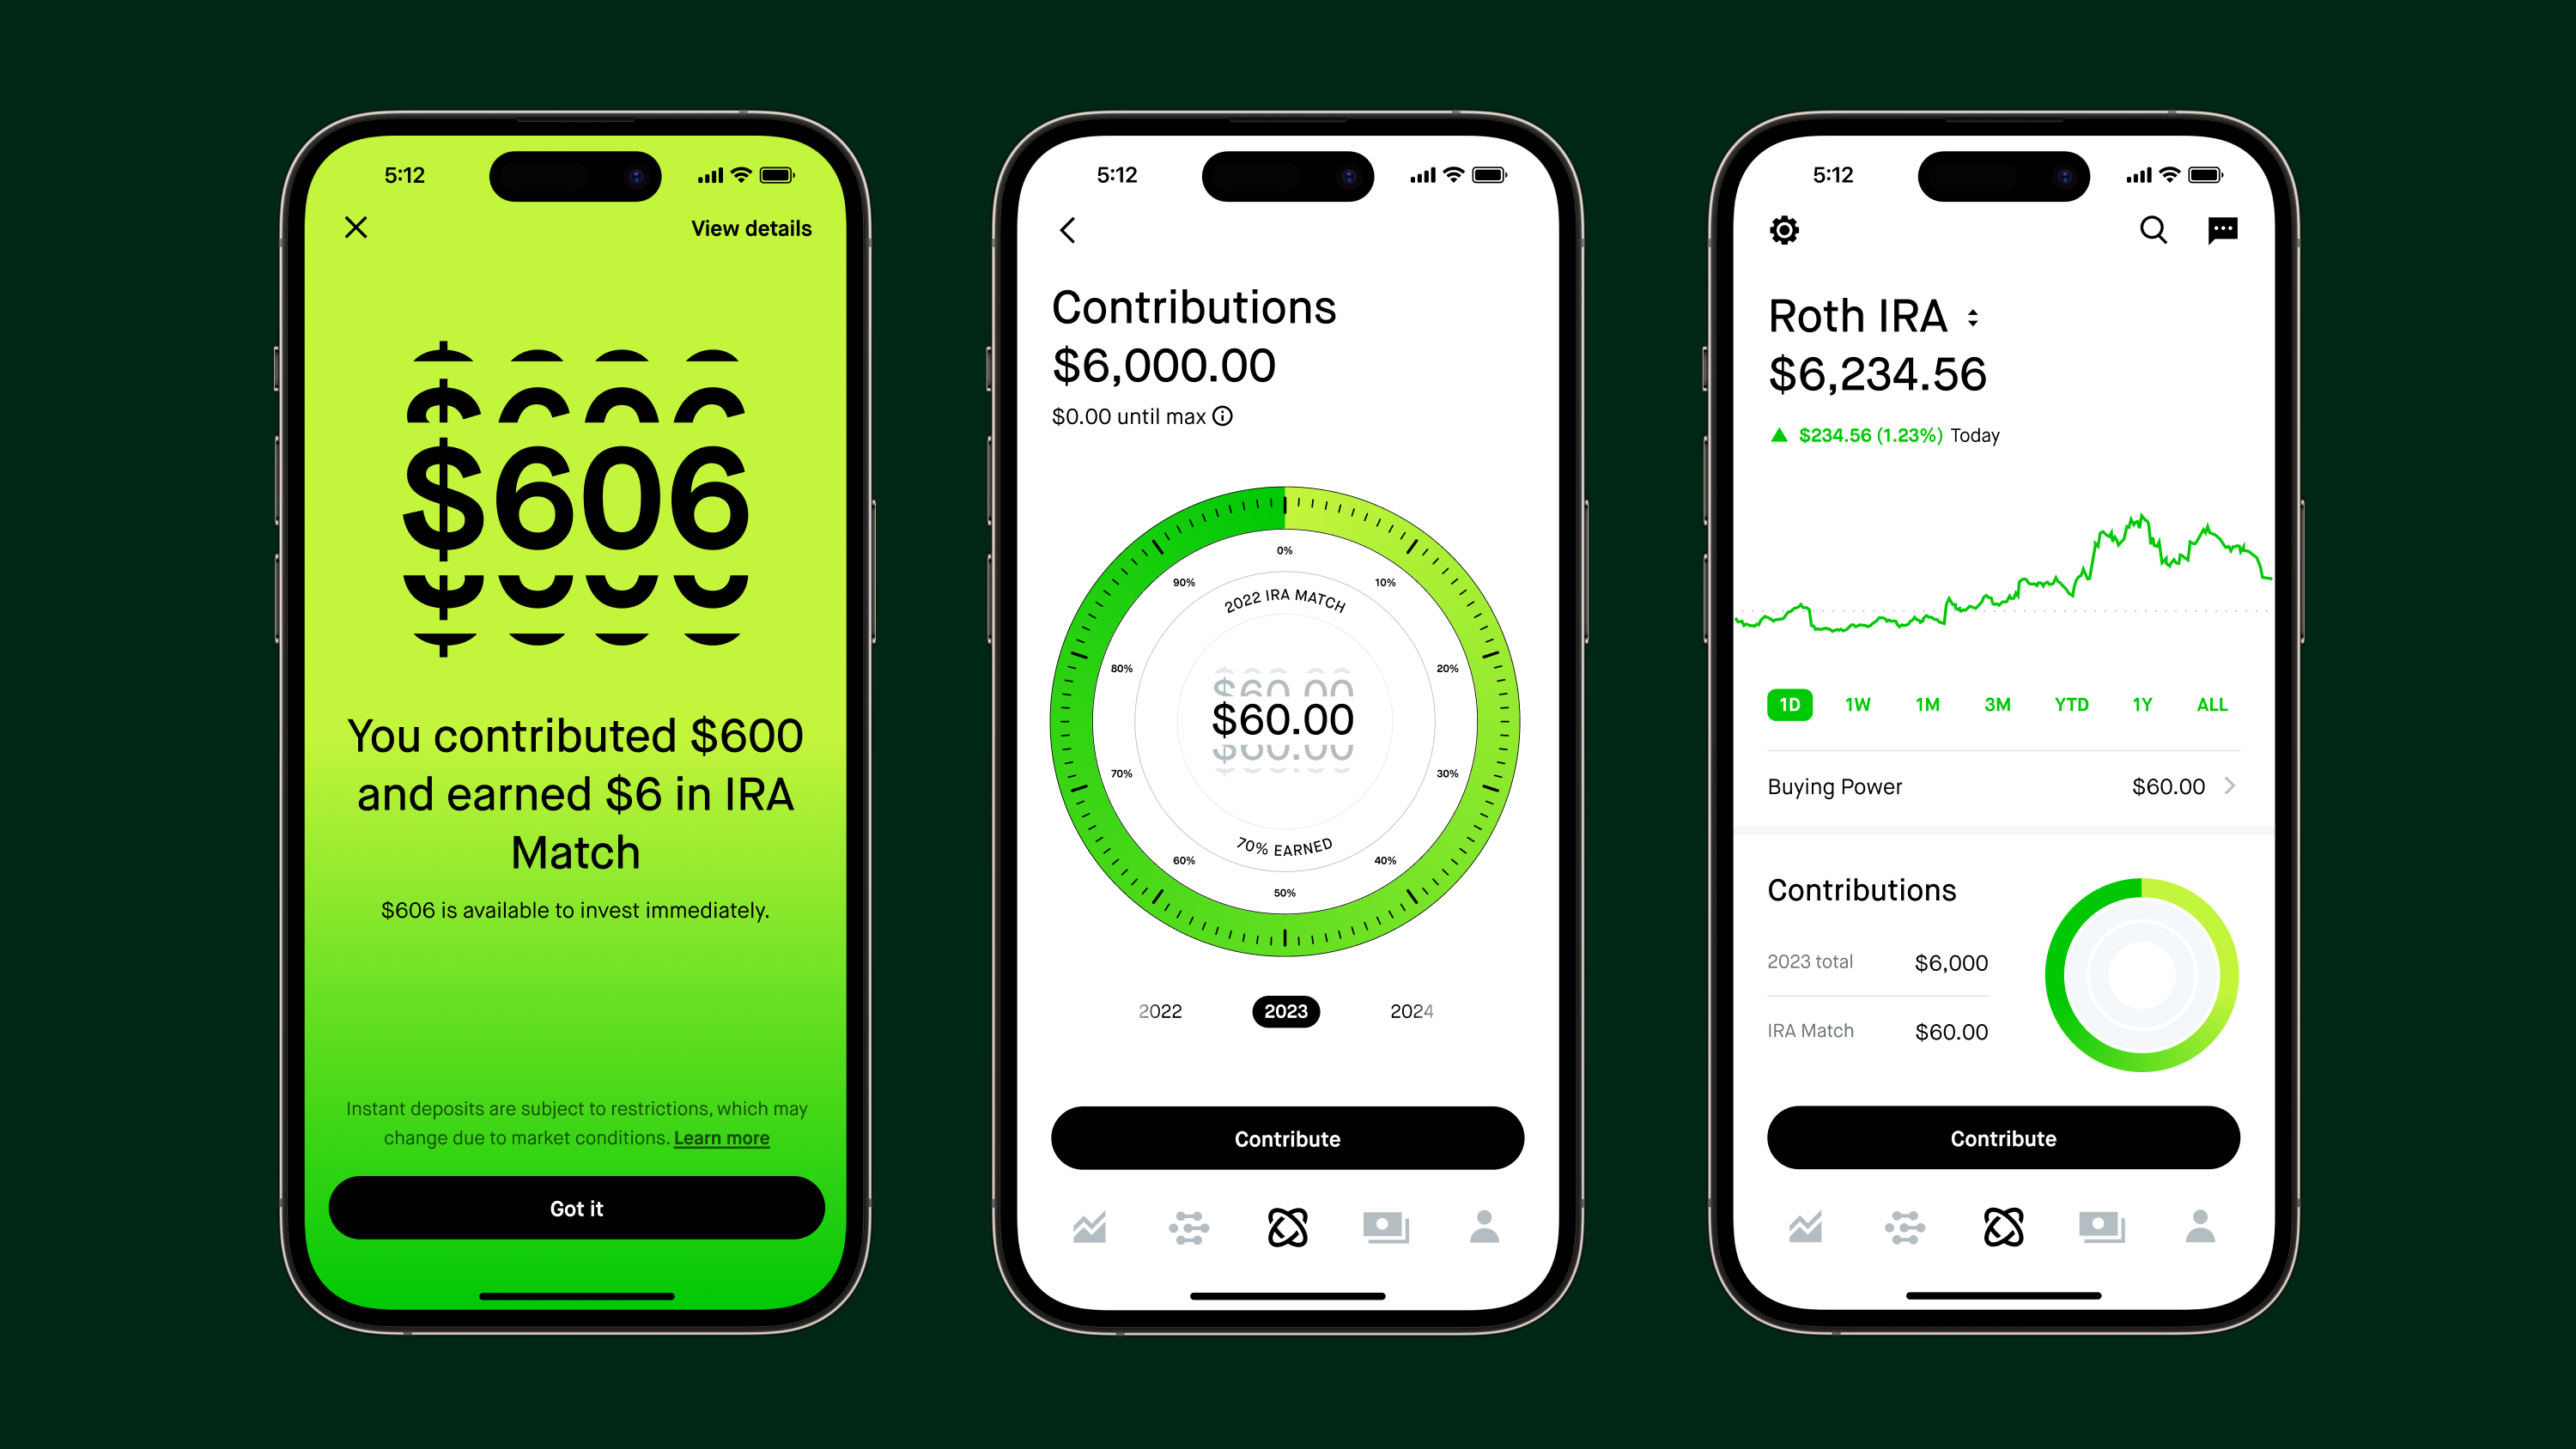 Robinhood Investing: New Retirement Product Will Match 1% of Contributions  - Bloomberg